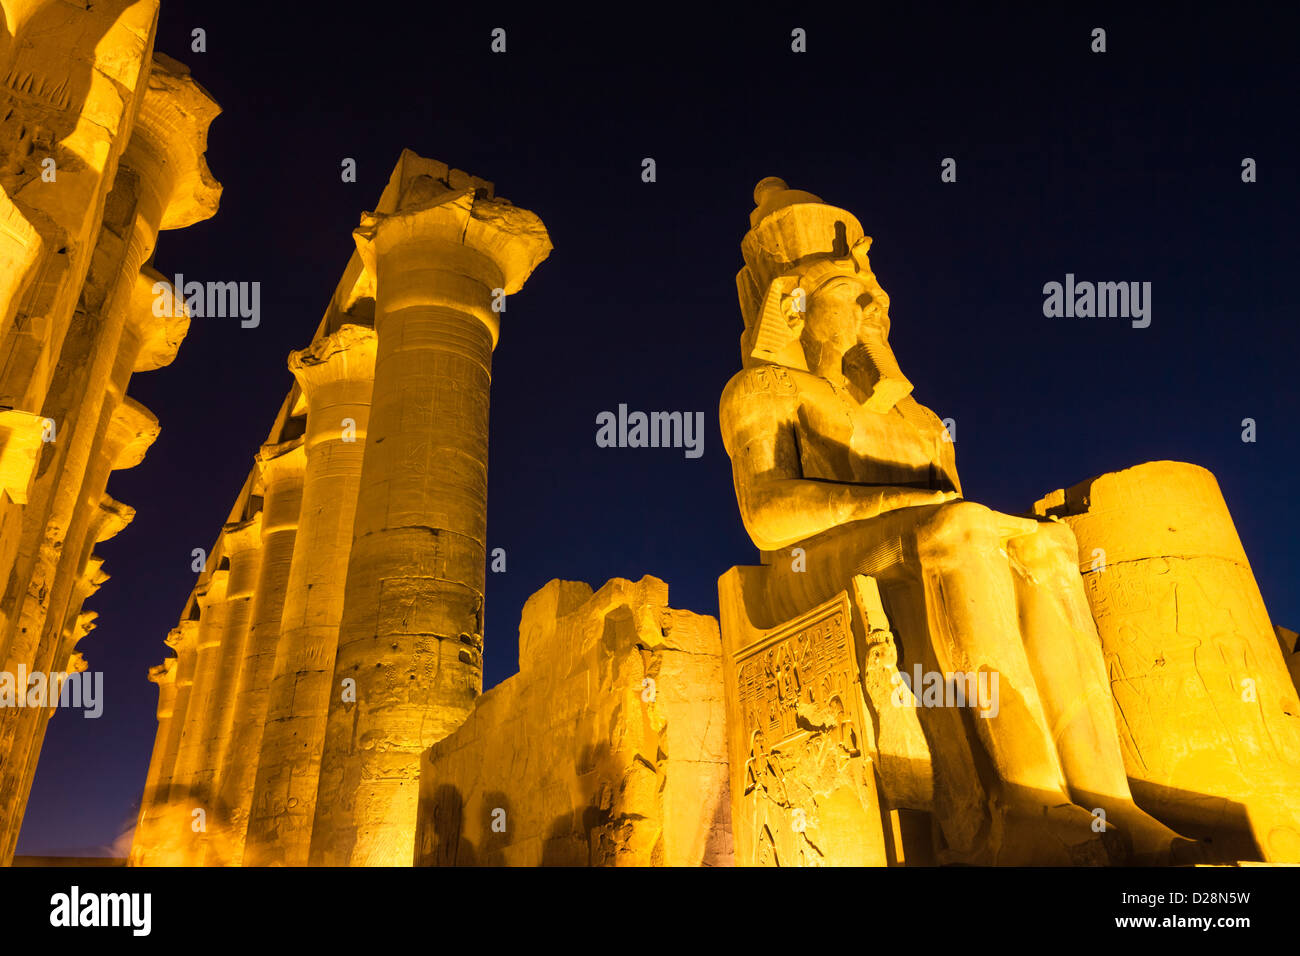 Colossal statue of Ramses II at the entrance of Luxor Temple, Egypt Stock Photo